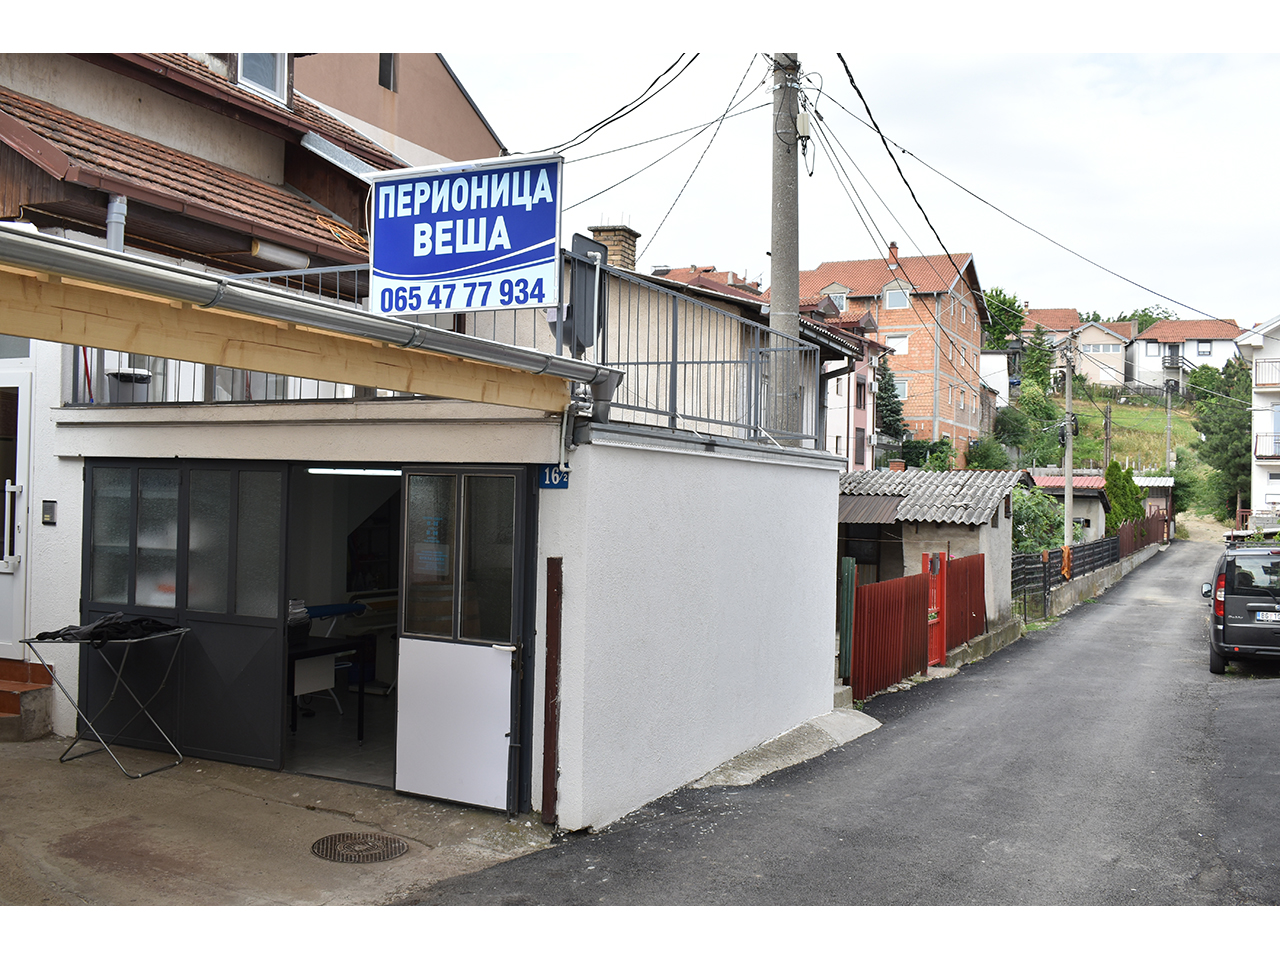 DRY CLEANING AND LAUNDRY KRISTALINO Dry-cleaning Beograd